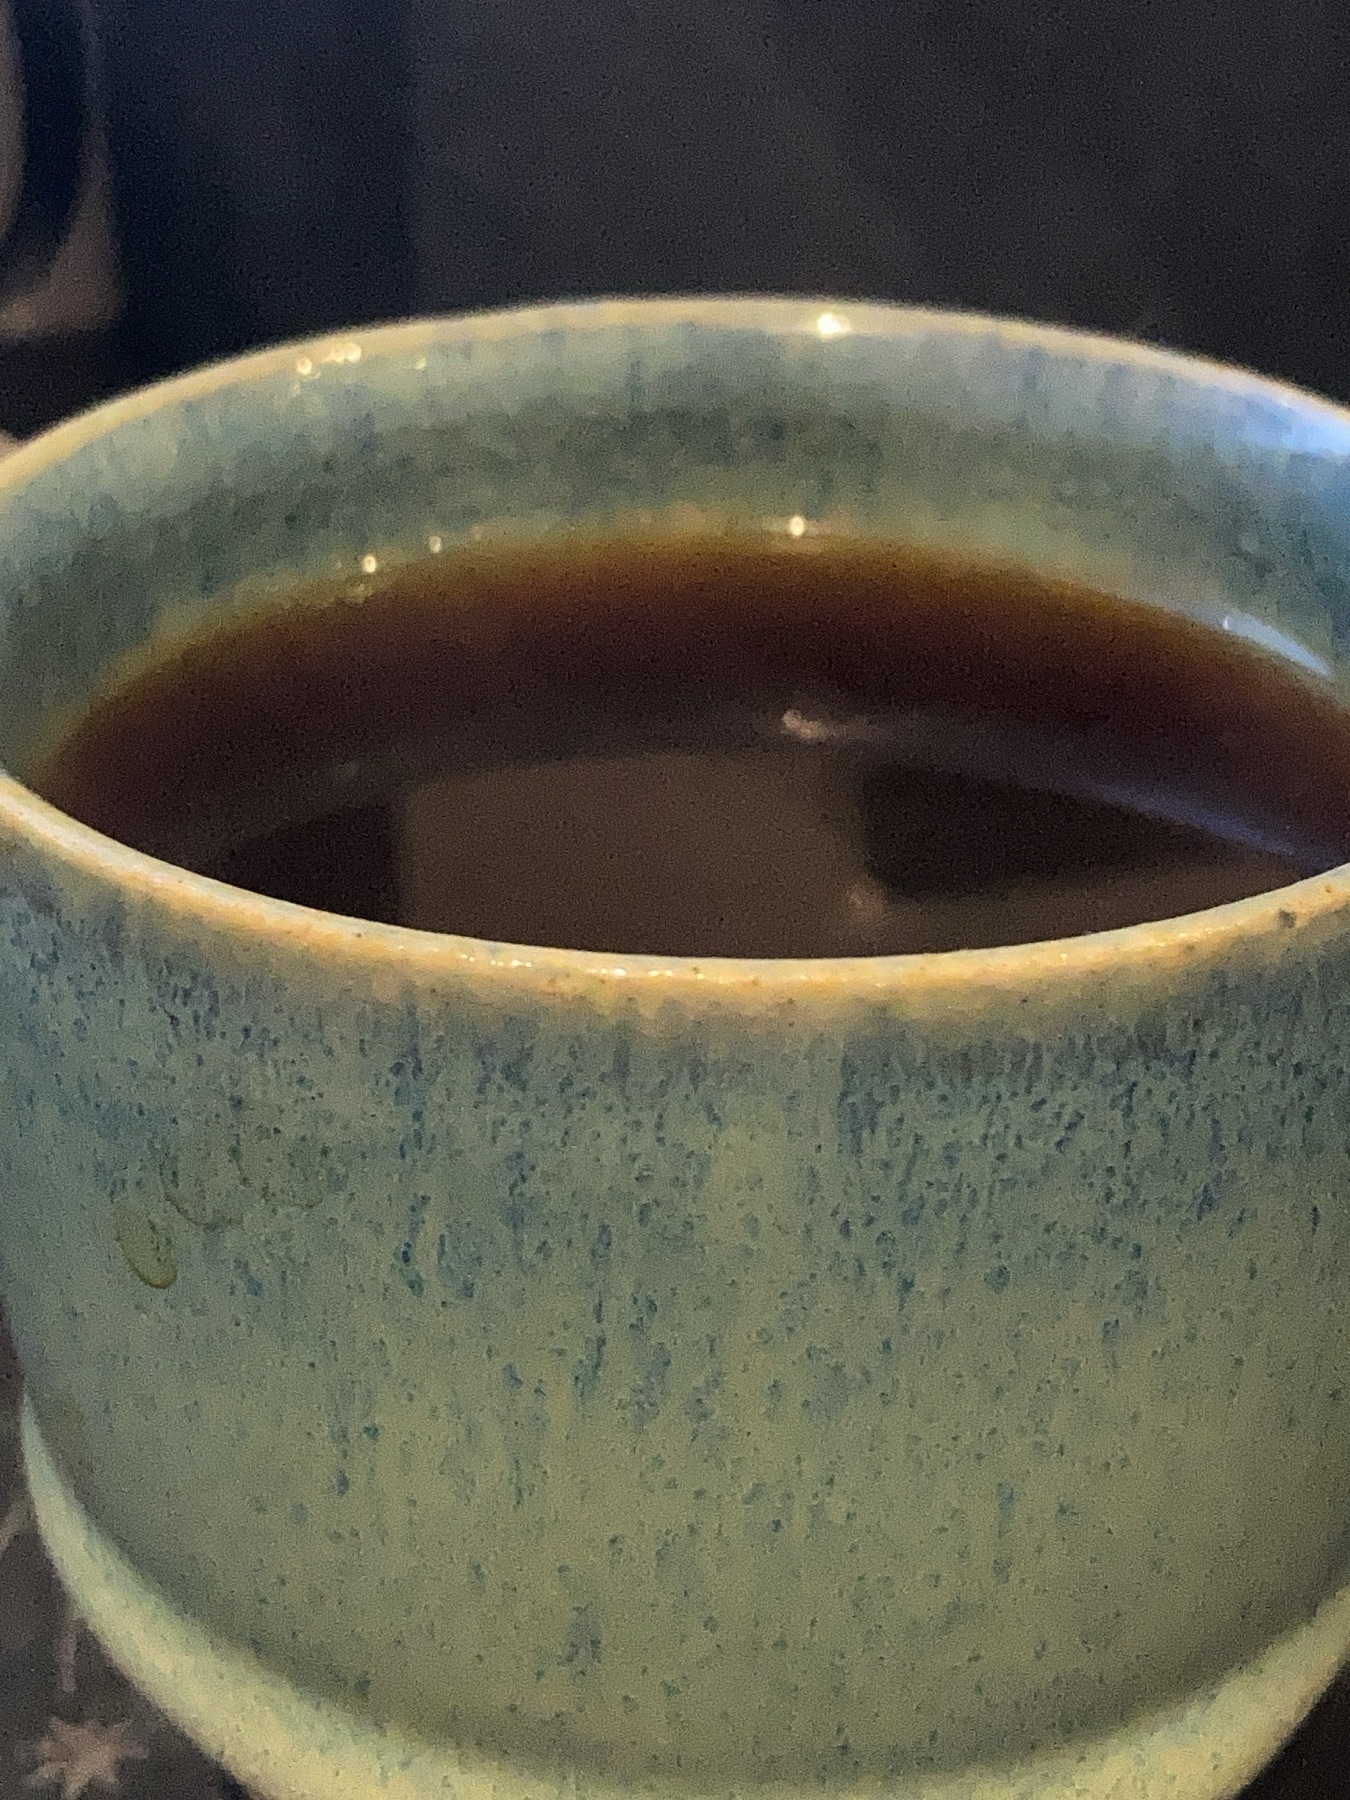 A cup of coffee close-up, with steam escaping from the cup. The cup is ceramic, decorated in a variety of ocean-inspired blues, and made locally!